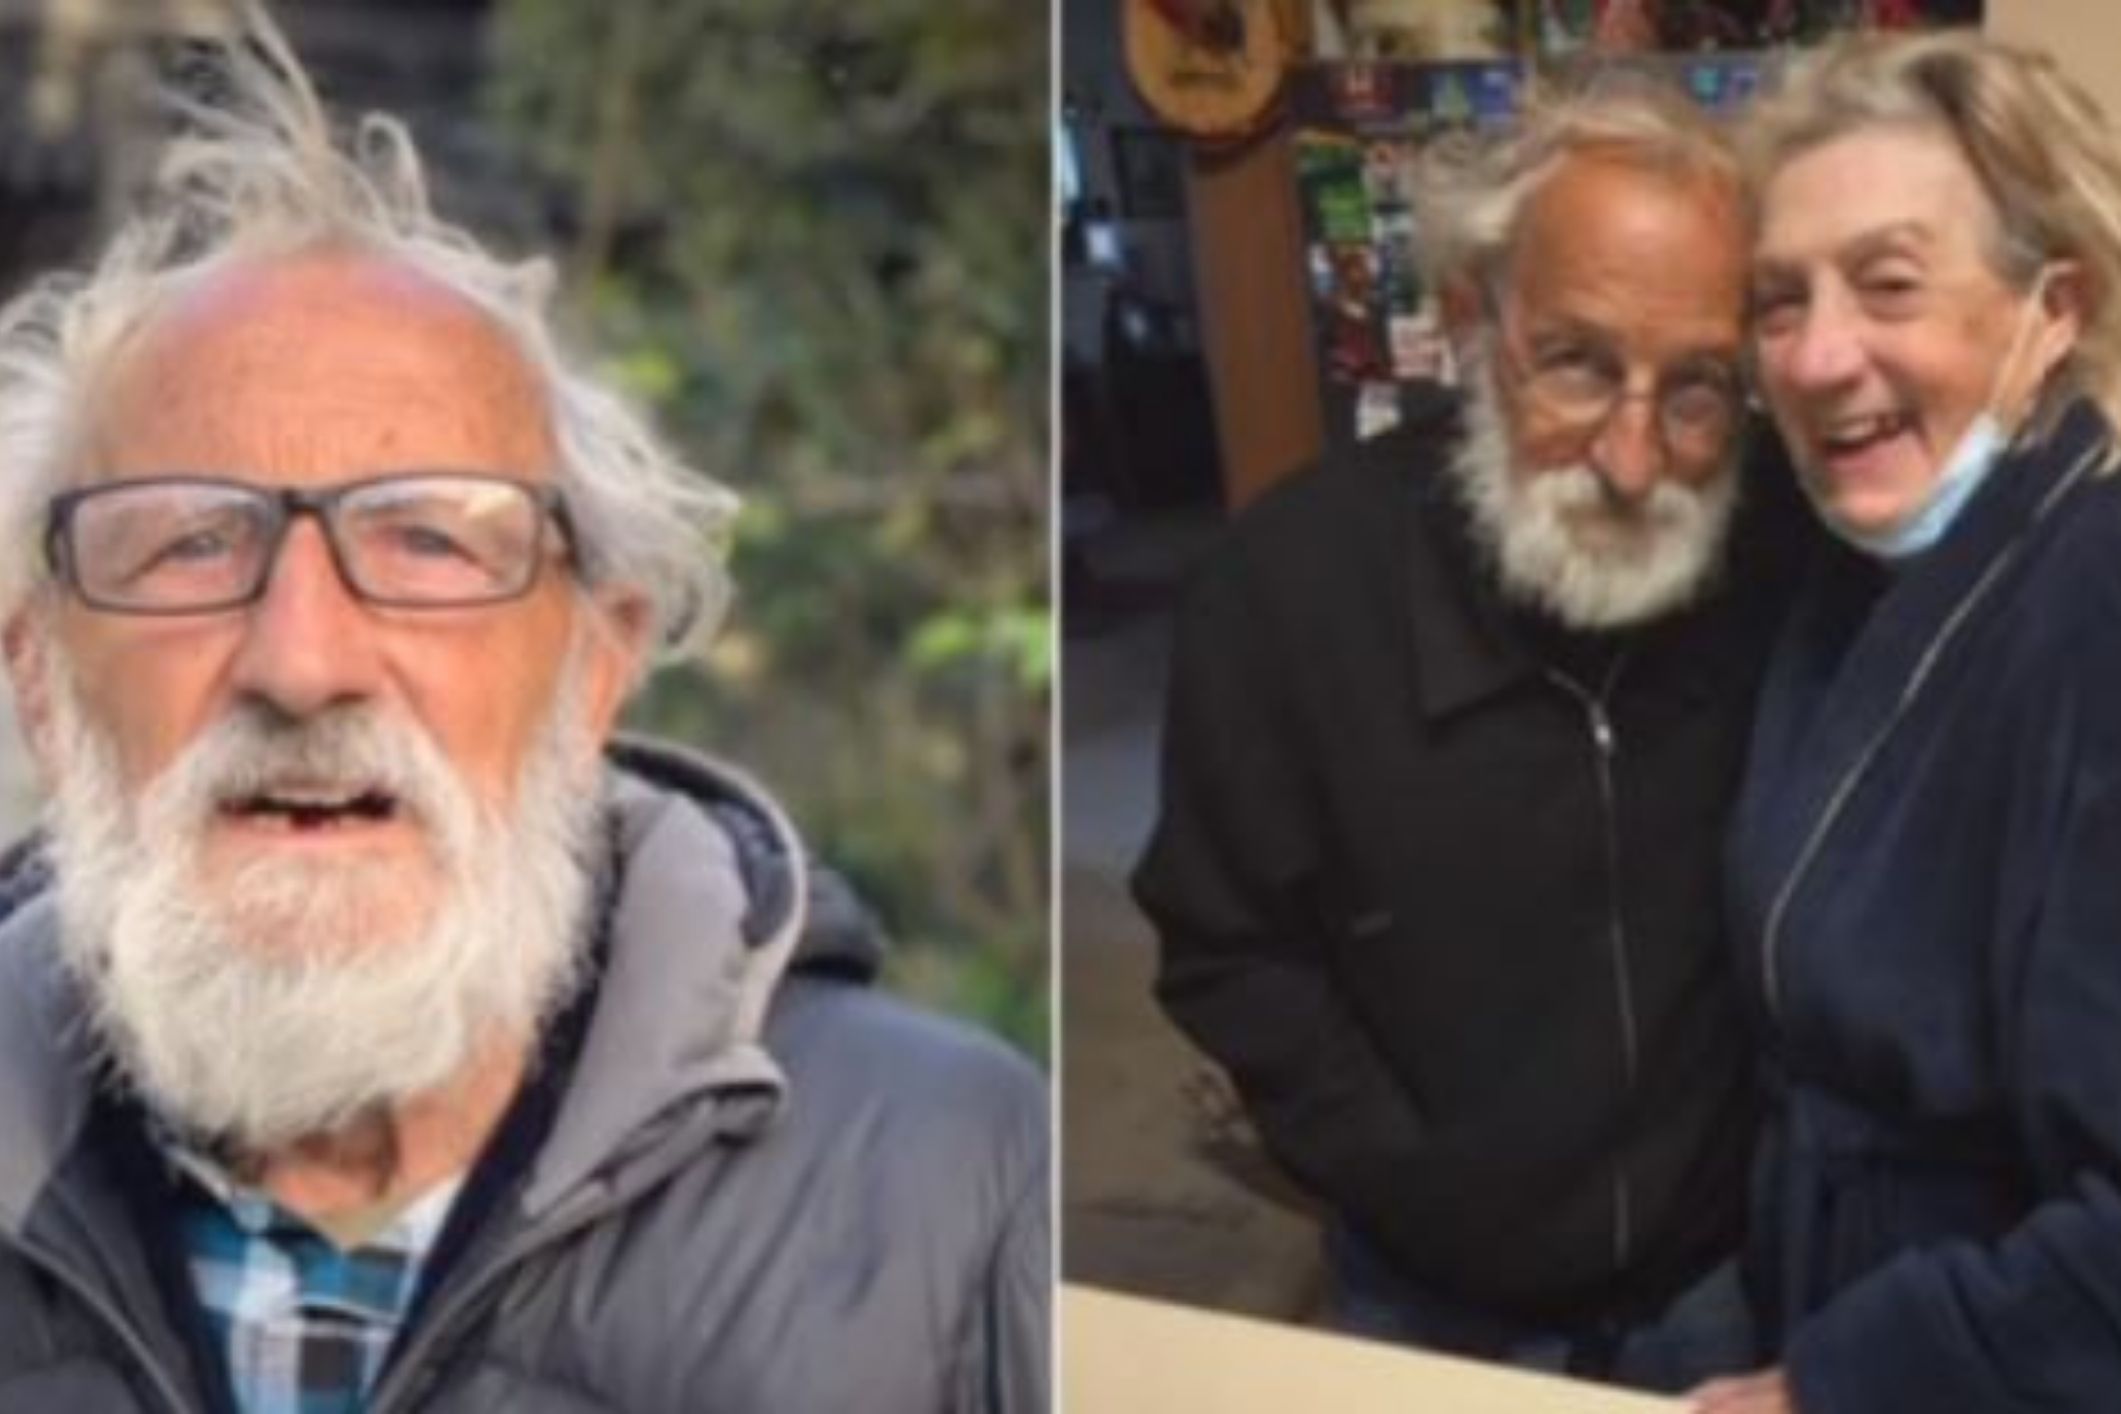 Melbourne grandad with Alzheimer’s missing for 5 days found safe and well